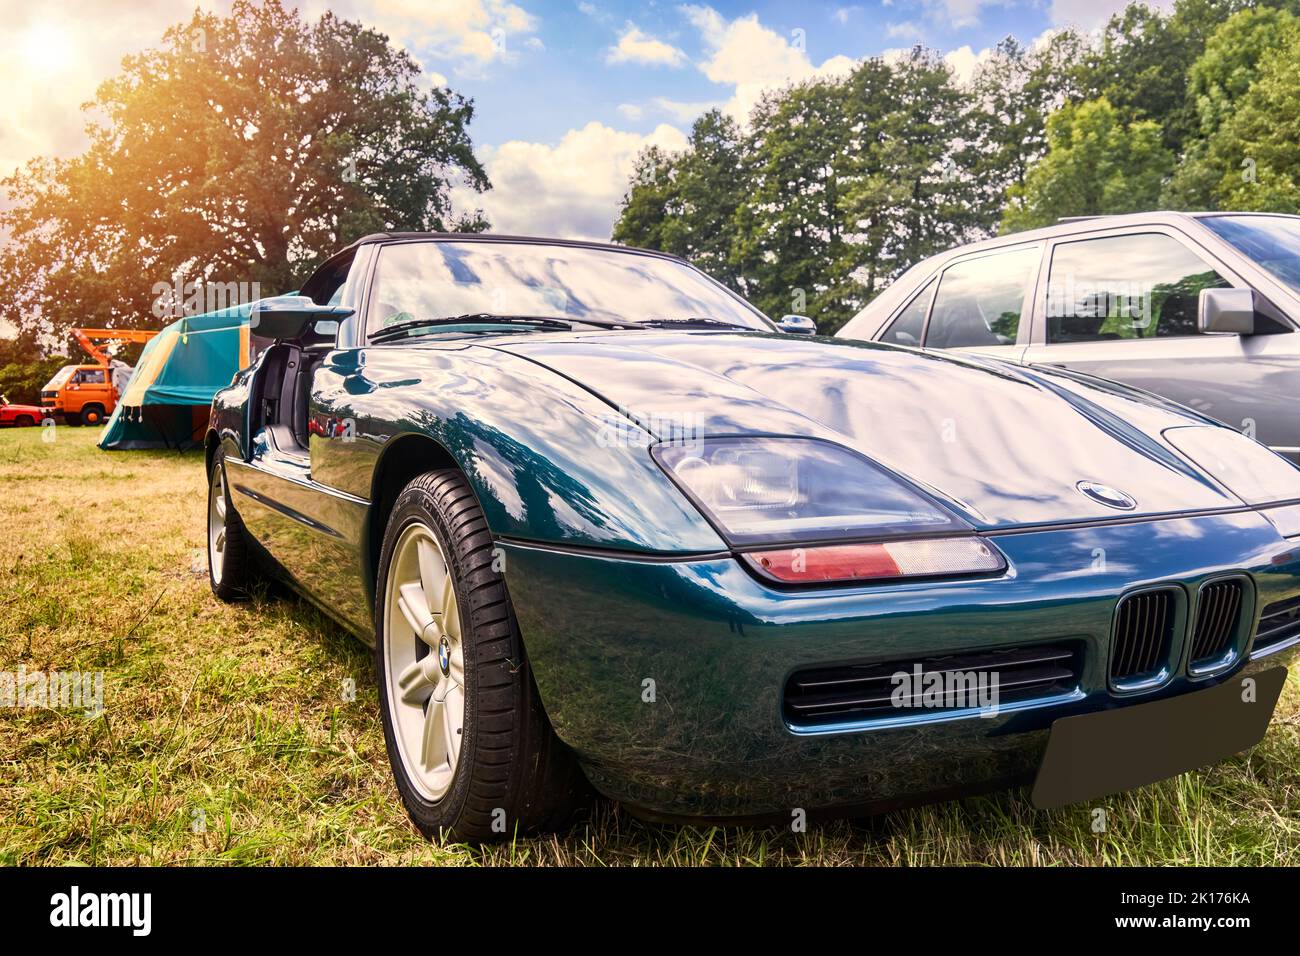 BMW Z1 sports car in oblique view, parked on a lawn with tents in the background, in Lehnin, Germany, September 11, 2022. Stock Photo